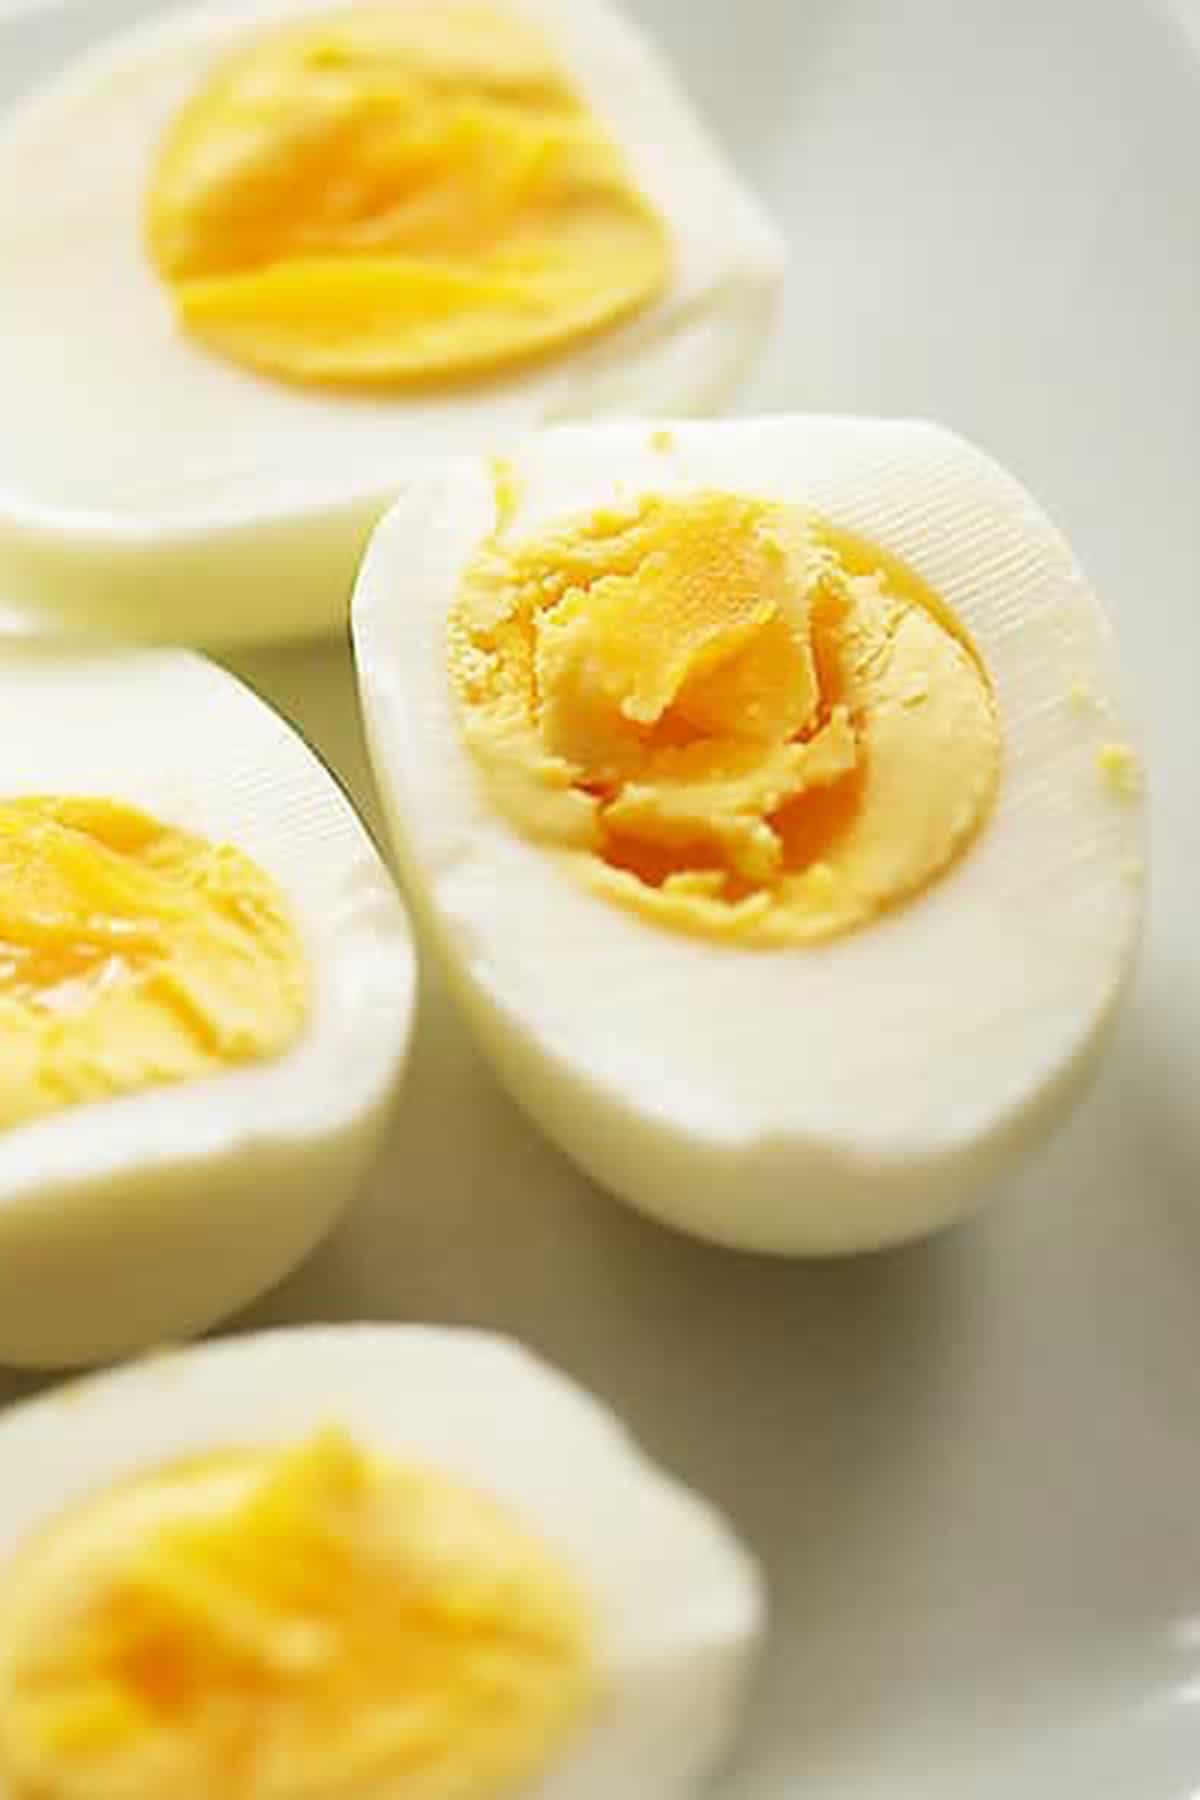 hard cooked eggs cut in half